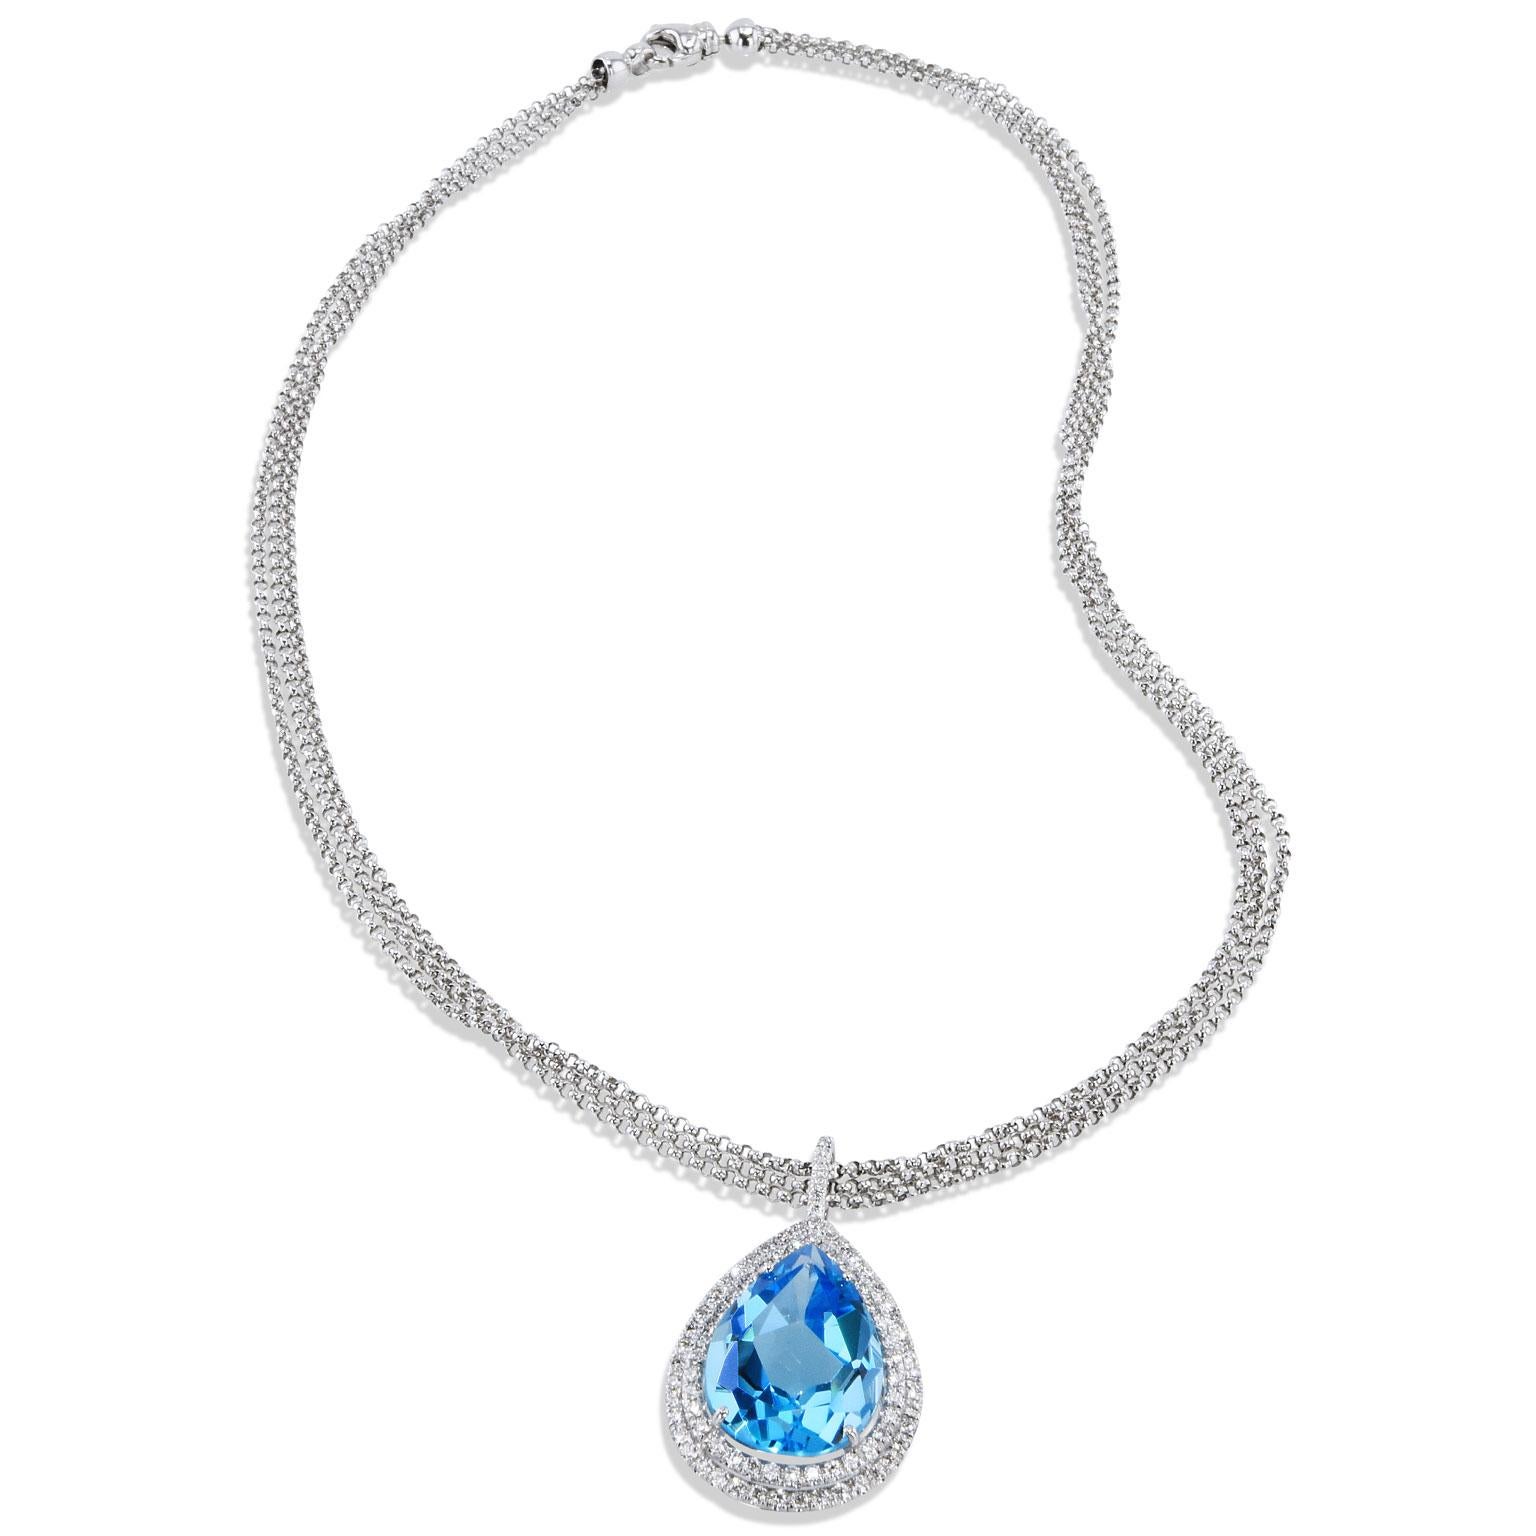 Handmade Pear Shaped Blue Topaz Diamond Drop Pendant.

This beautiful pendant features a 17.74 carat pear shaped blue topaz.
There is an additional 122 pieces of F/G color diamonds that surround this stunning stone that total .95 carats.

This